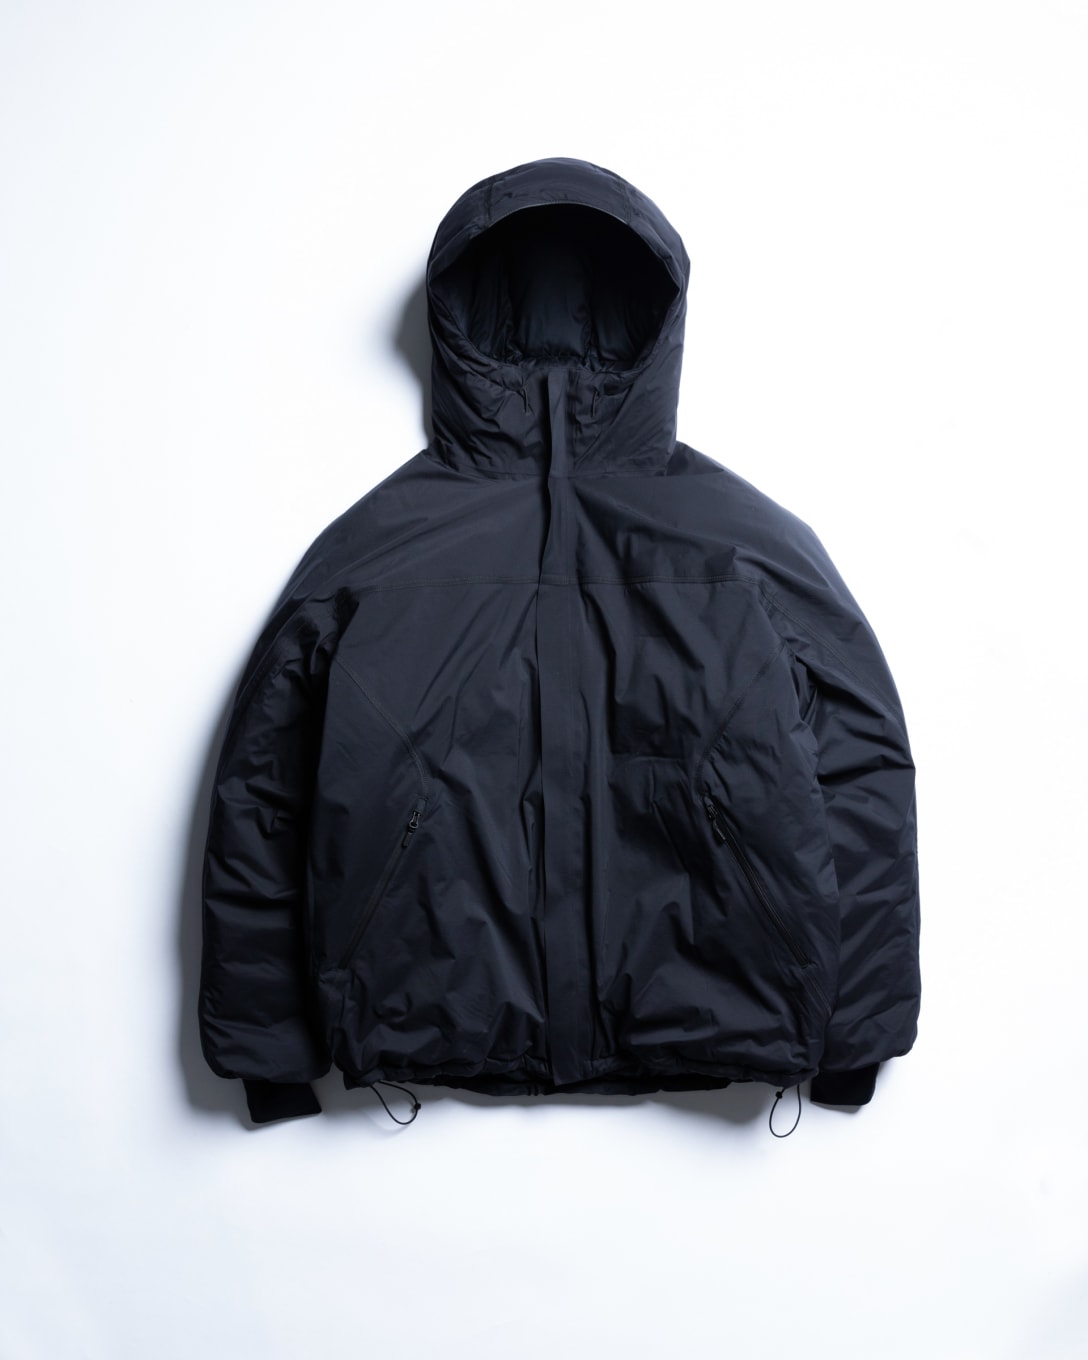 CITY DWELLERS HOODED DOWN JACKET（9万3500円） Image by FASHIONSNAP